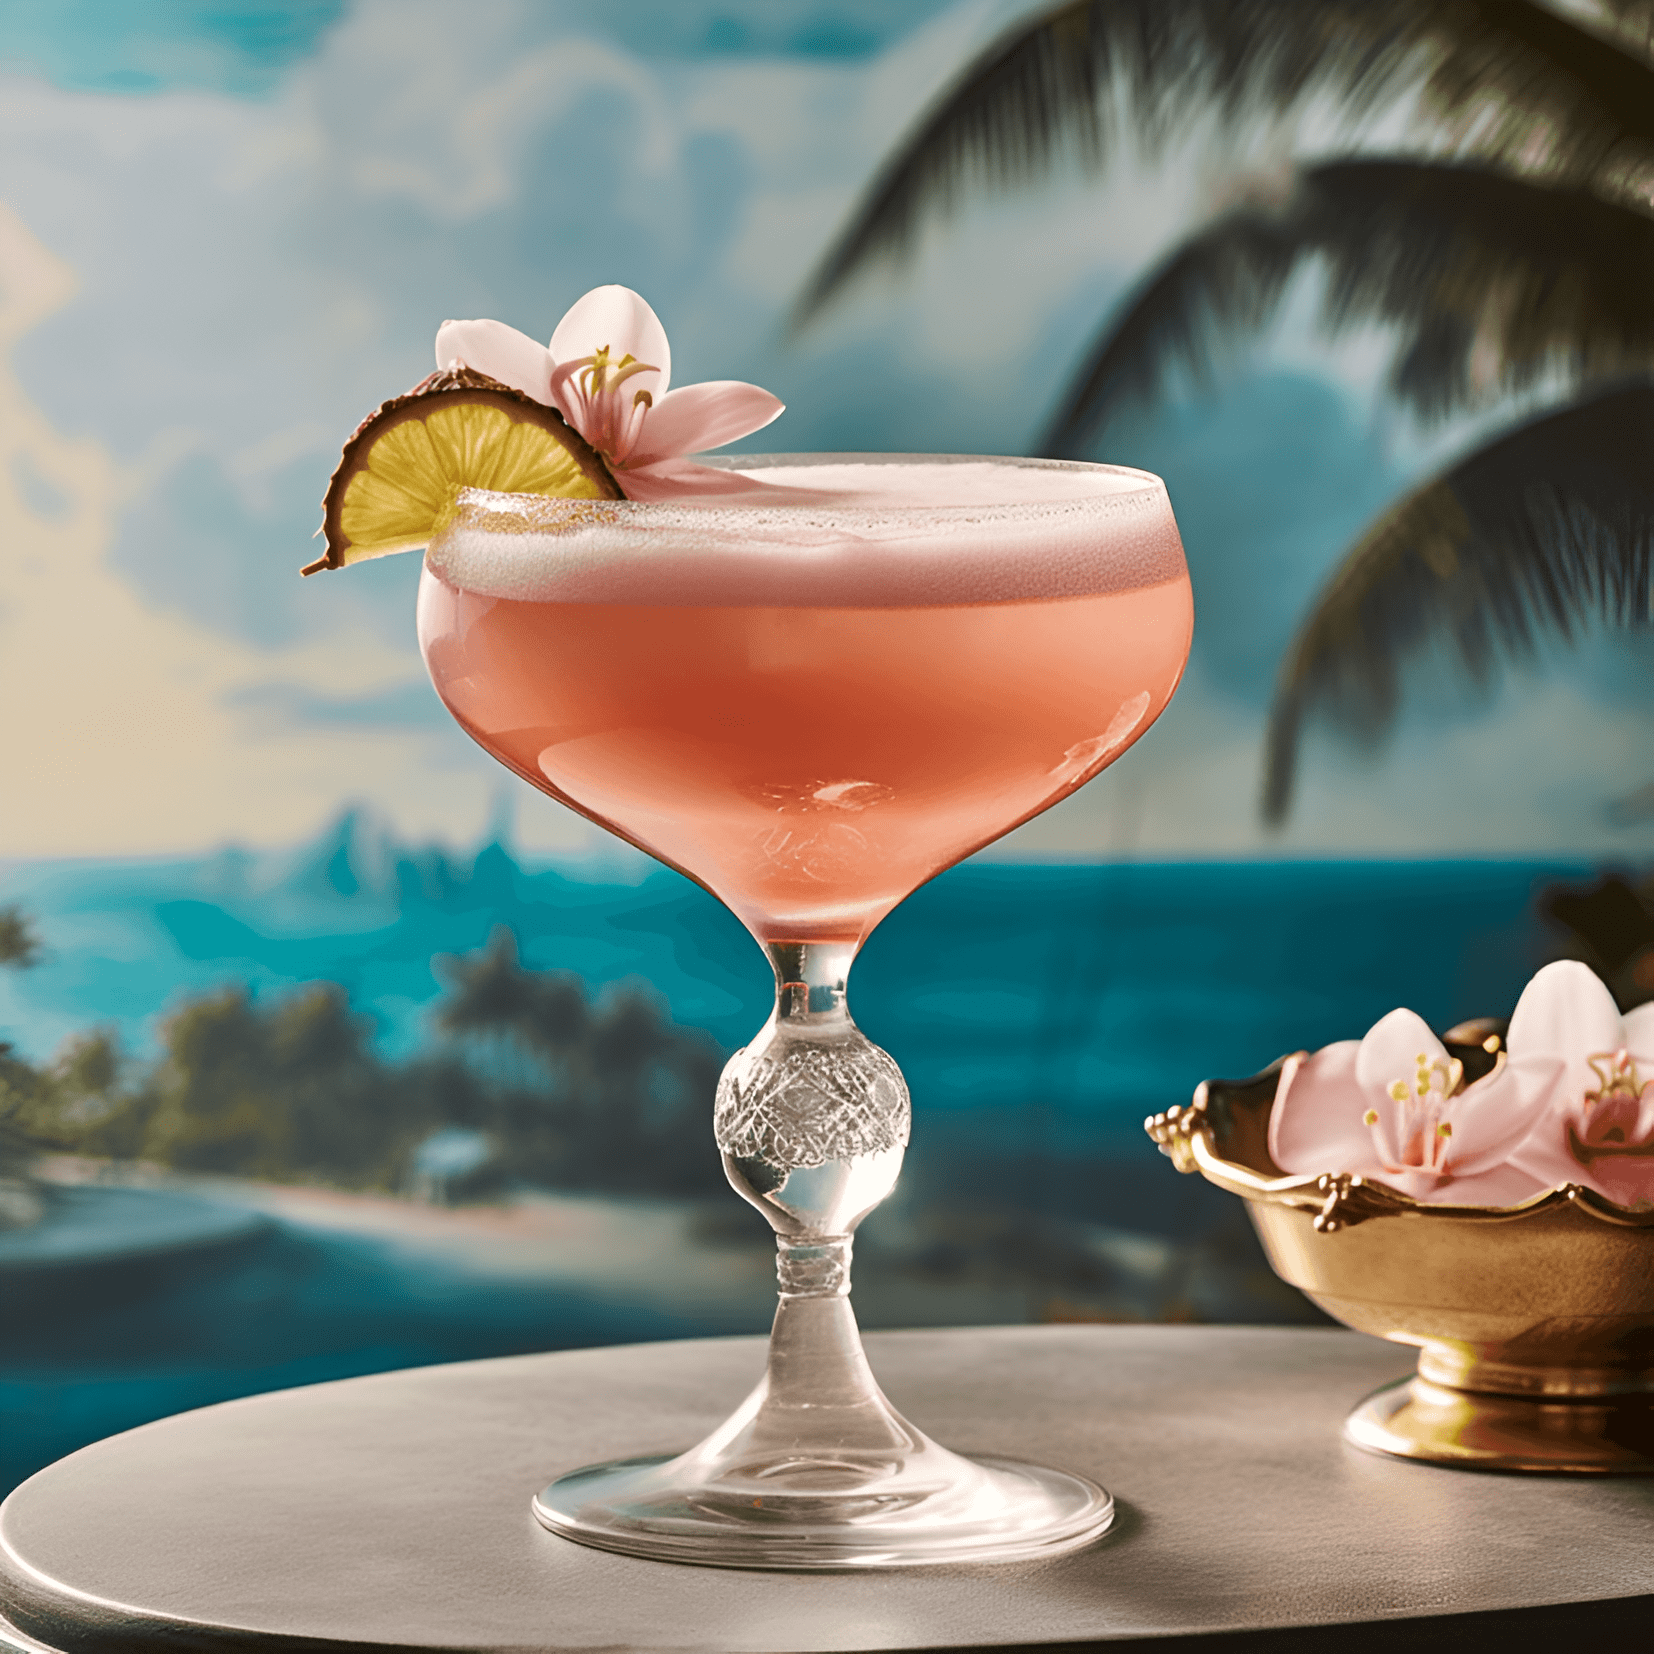 Mary Pickford Cocktail Recipe - The Mary Pickford cocktail is a delightful blend of sweet, tangy, and fruity flavors. The pineapple juice and grenadine give it a tropical sweetness, while the maraschino liqueur adds a hint of cherry and almond. The rum provides a smooth and slightly warming finish.